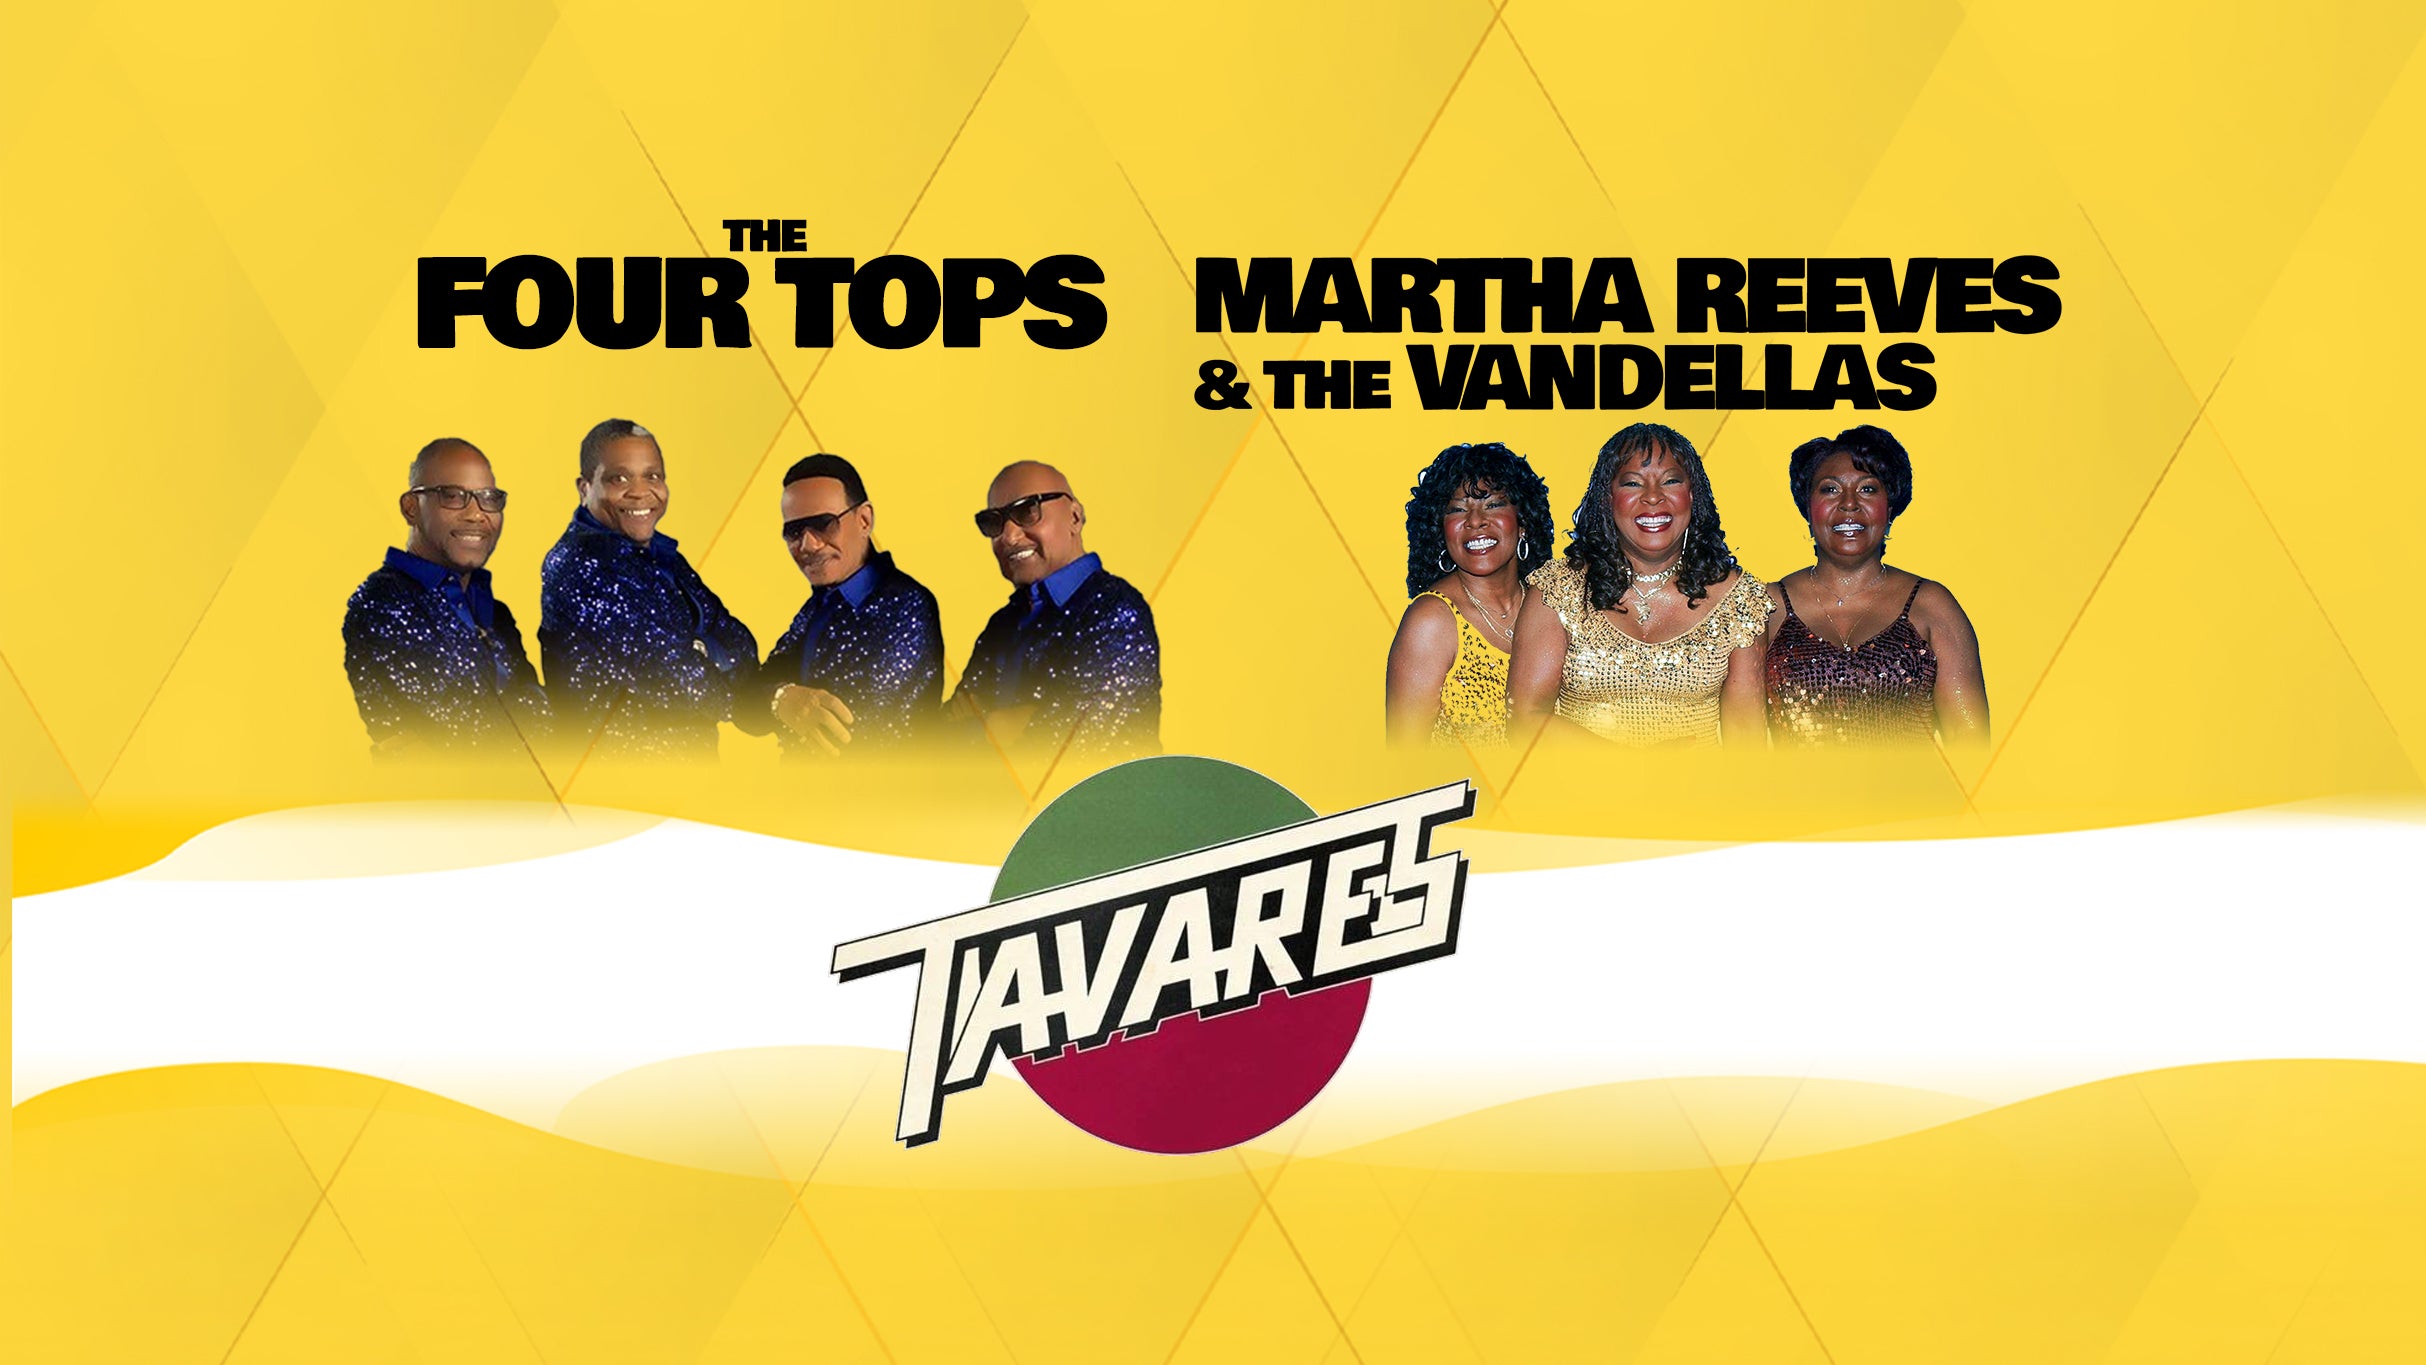 The Four Tops / Tavares/ Martha Reeves & the Vandellas in Cardiff promo photo for Venue presale offer code